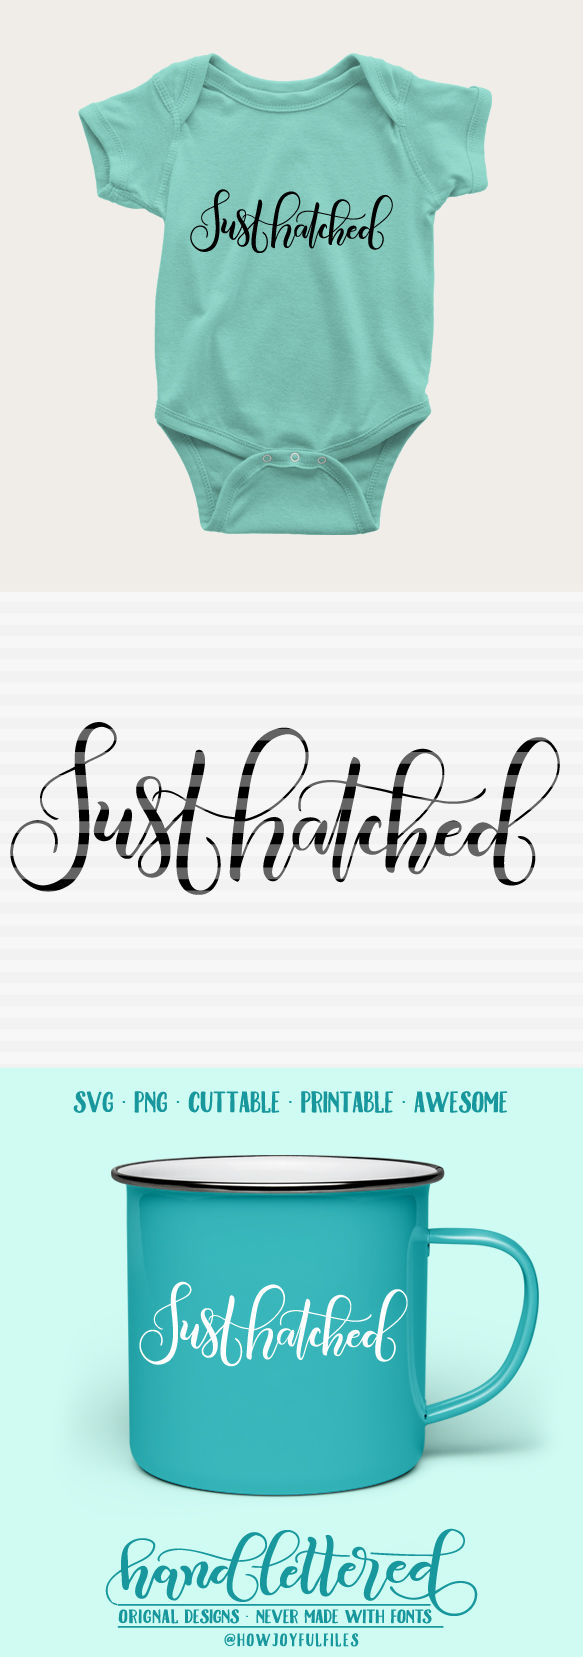 Just hatched graphic overlay DXF SVG PDF files hand drawn lettered cut file